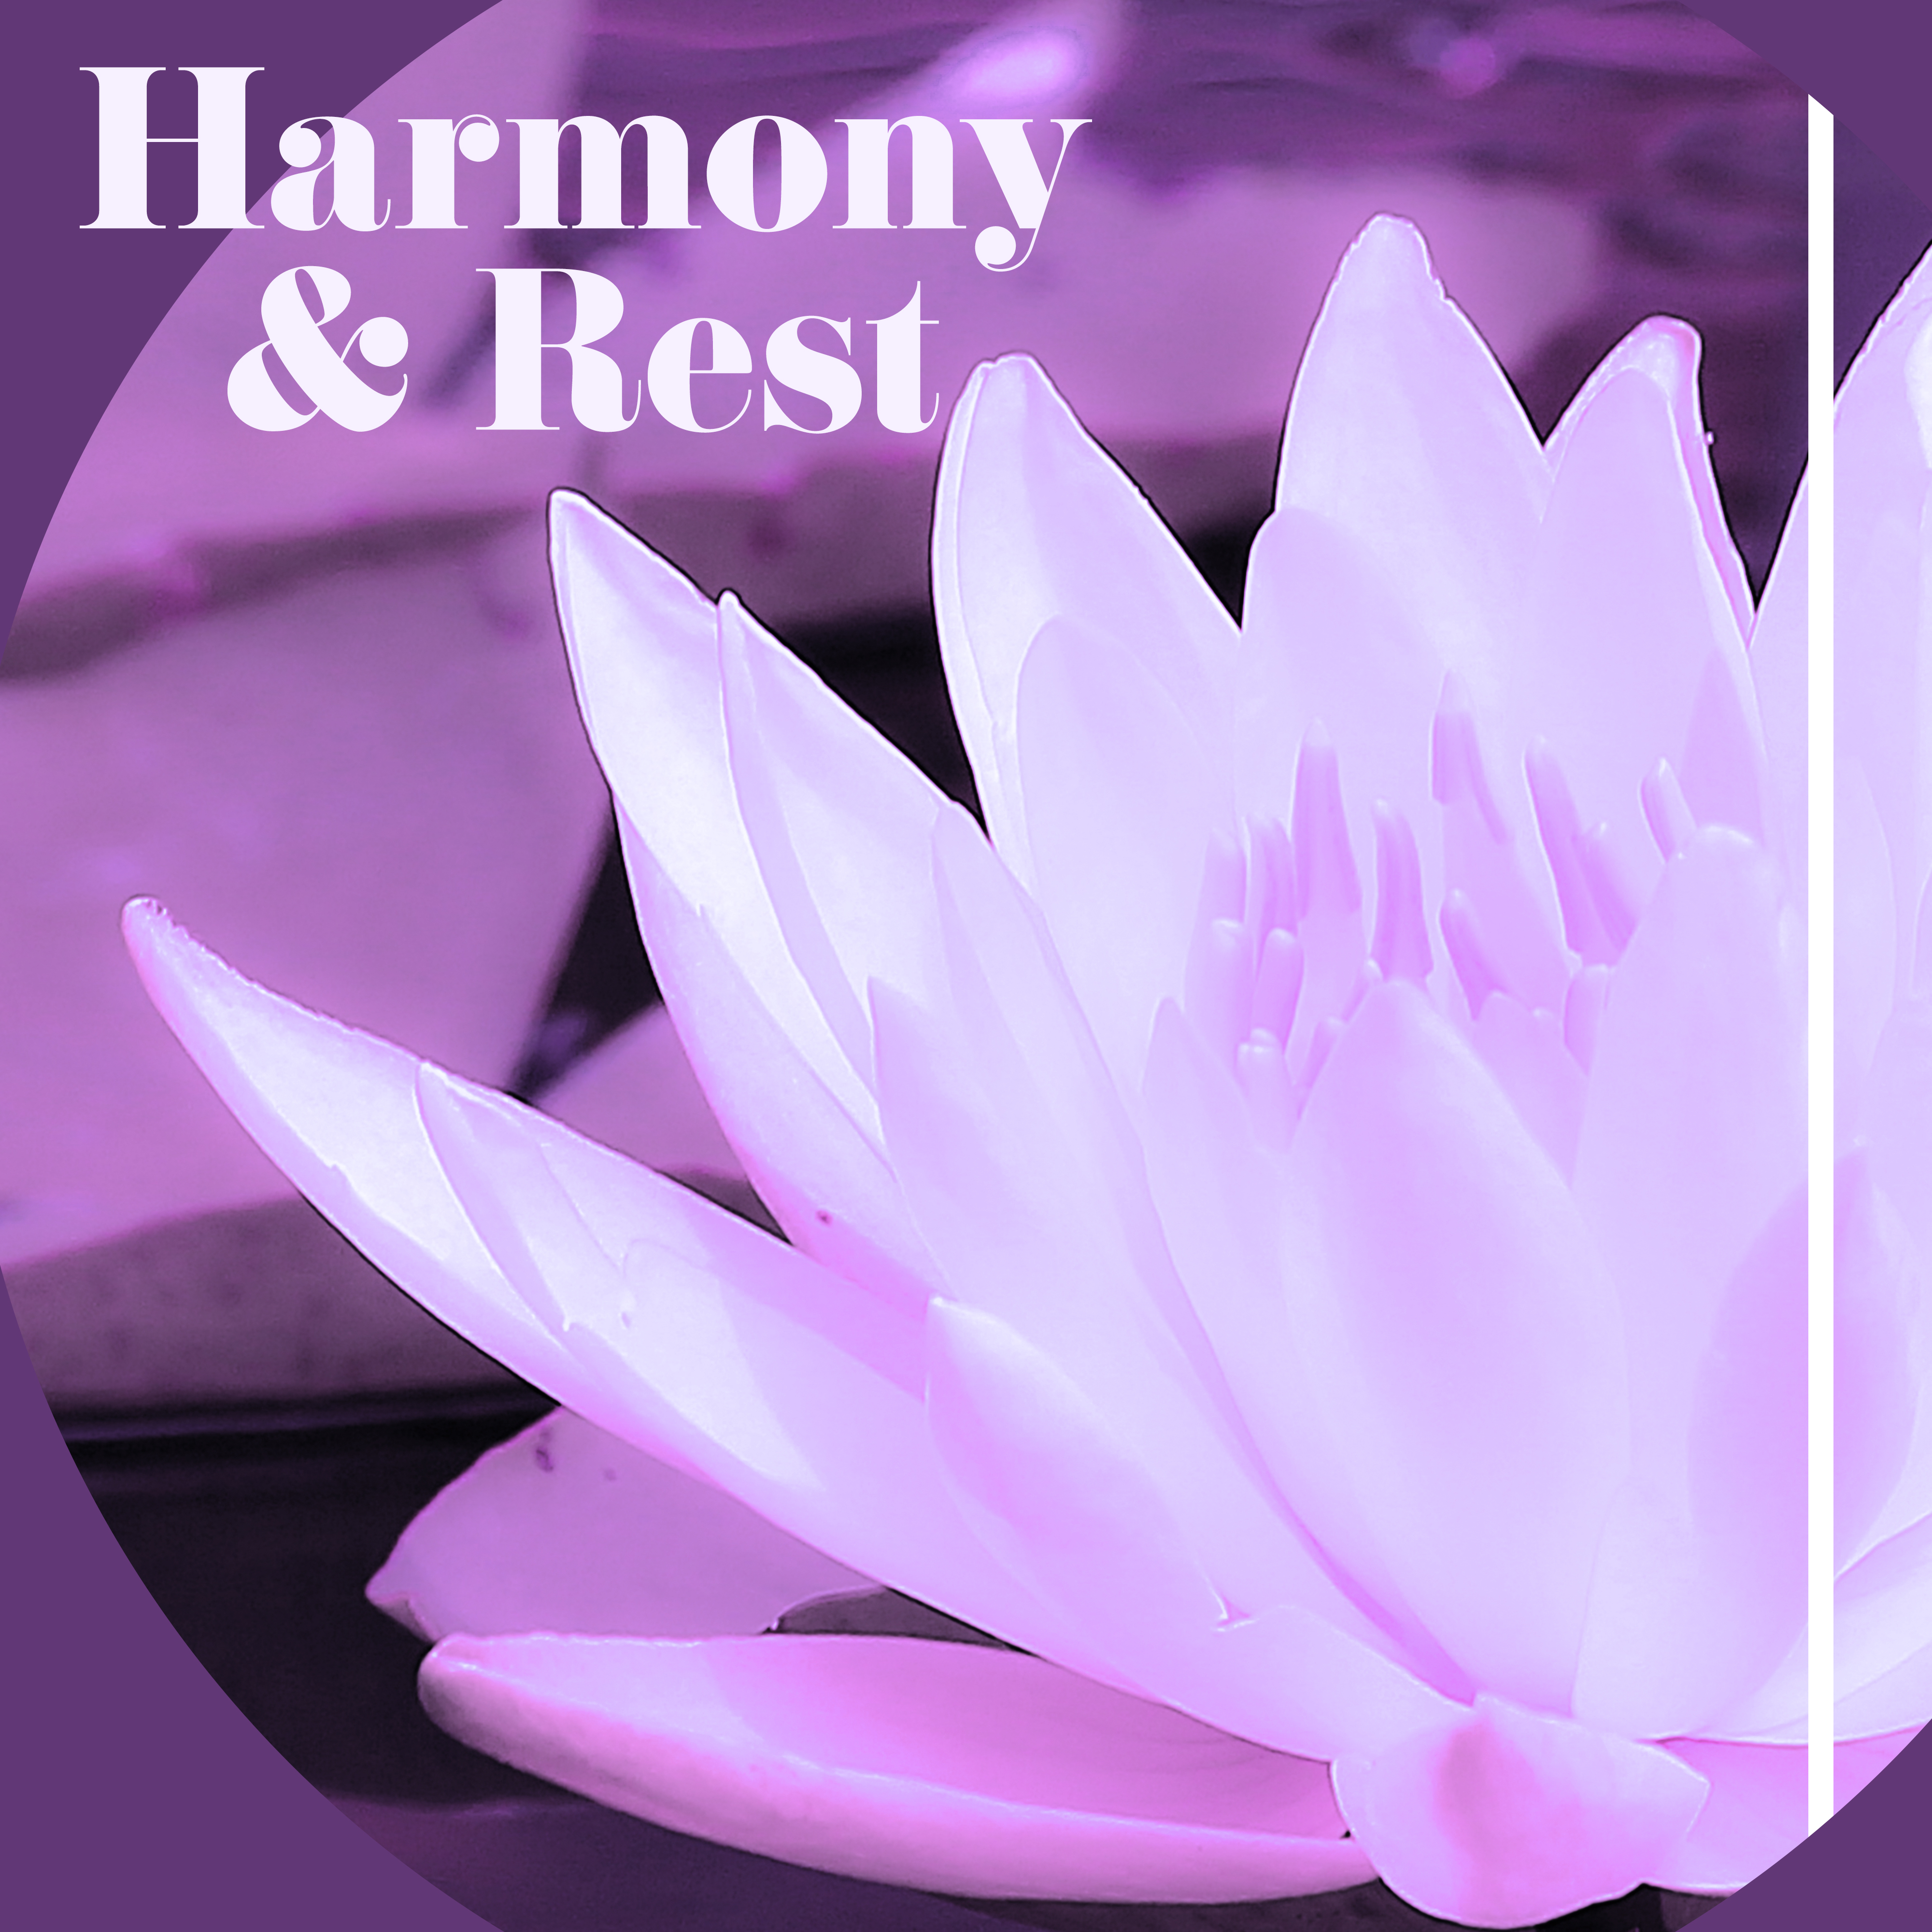 Harmony & Rest – Music for Yoga, Asian Meditation, Healing Sounds, Oriental Flute, Music Reduces Stress